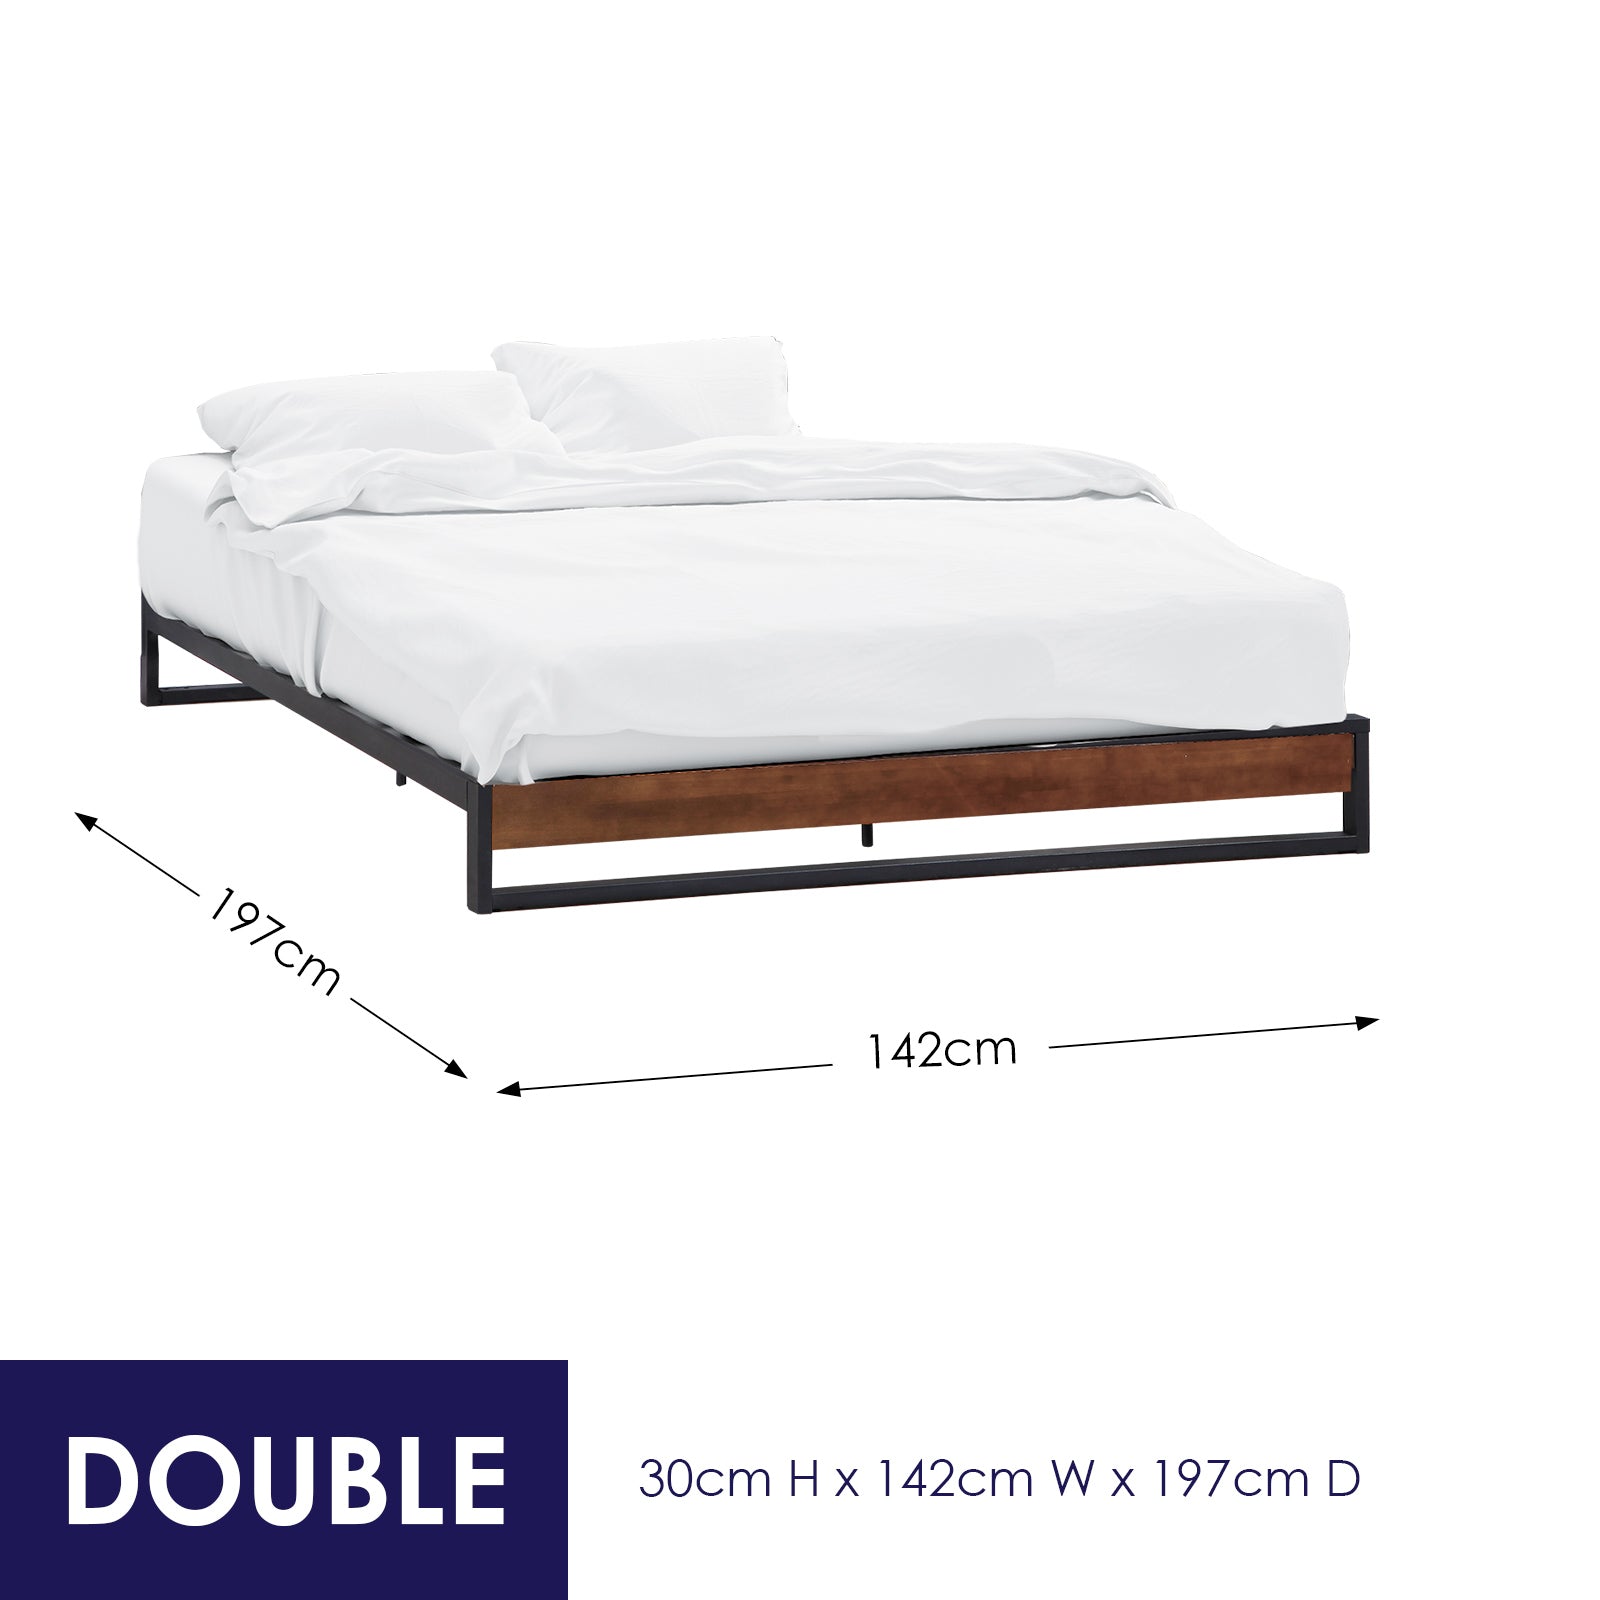 Sorrento Metal and Wood bed base - Double